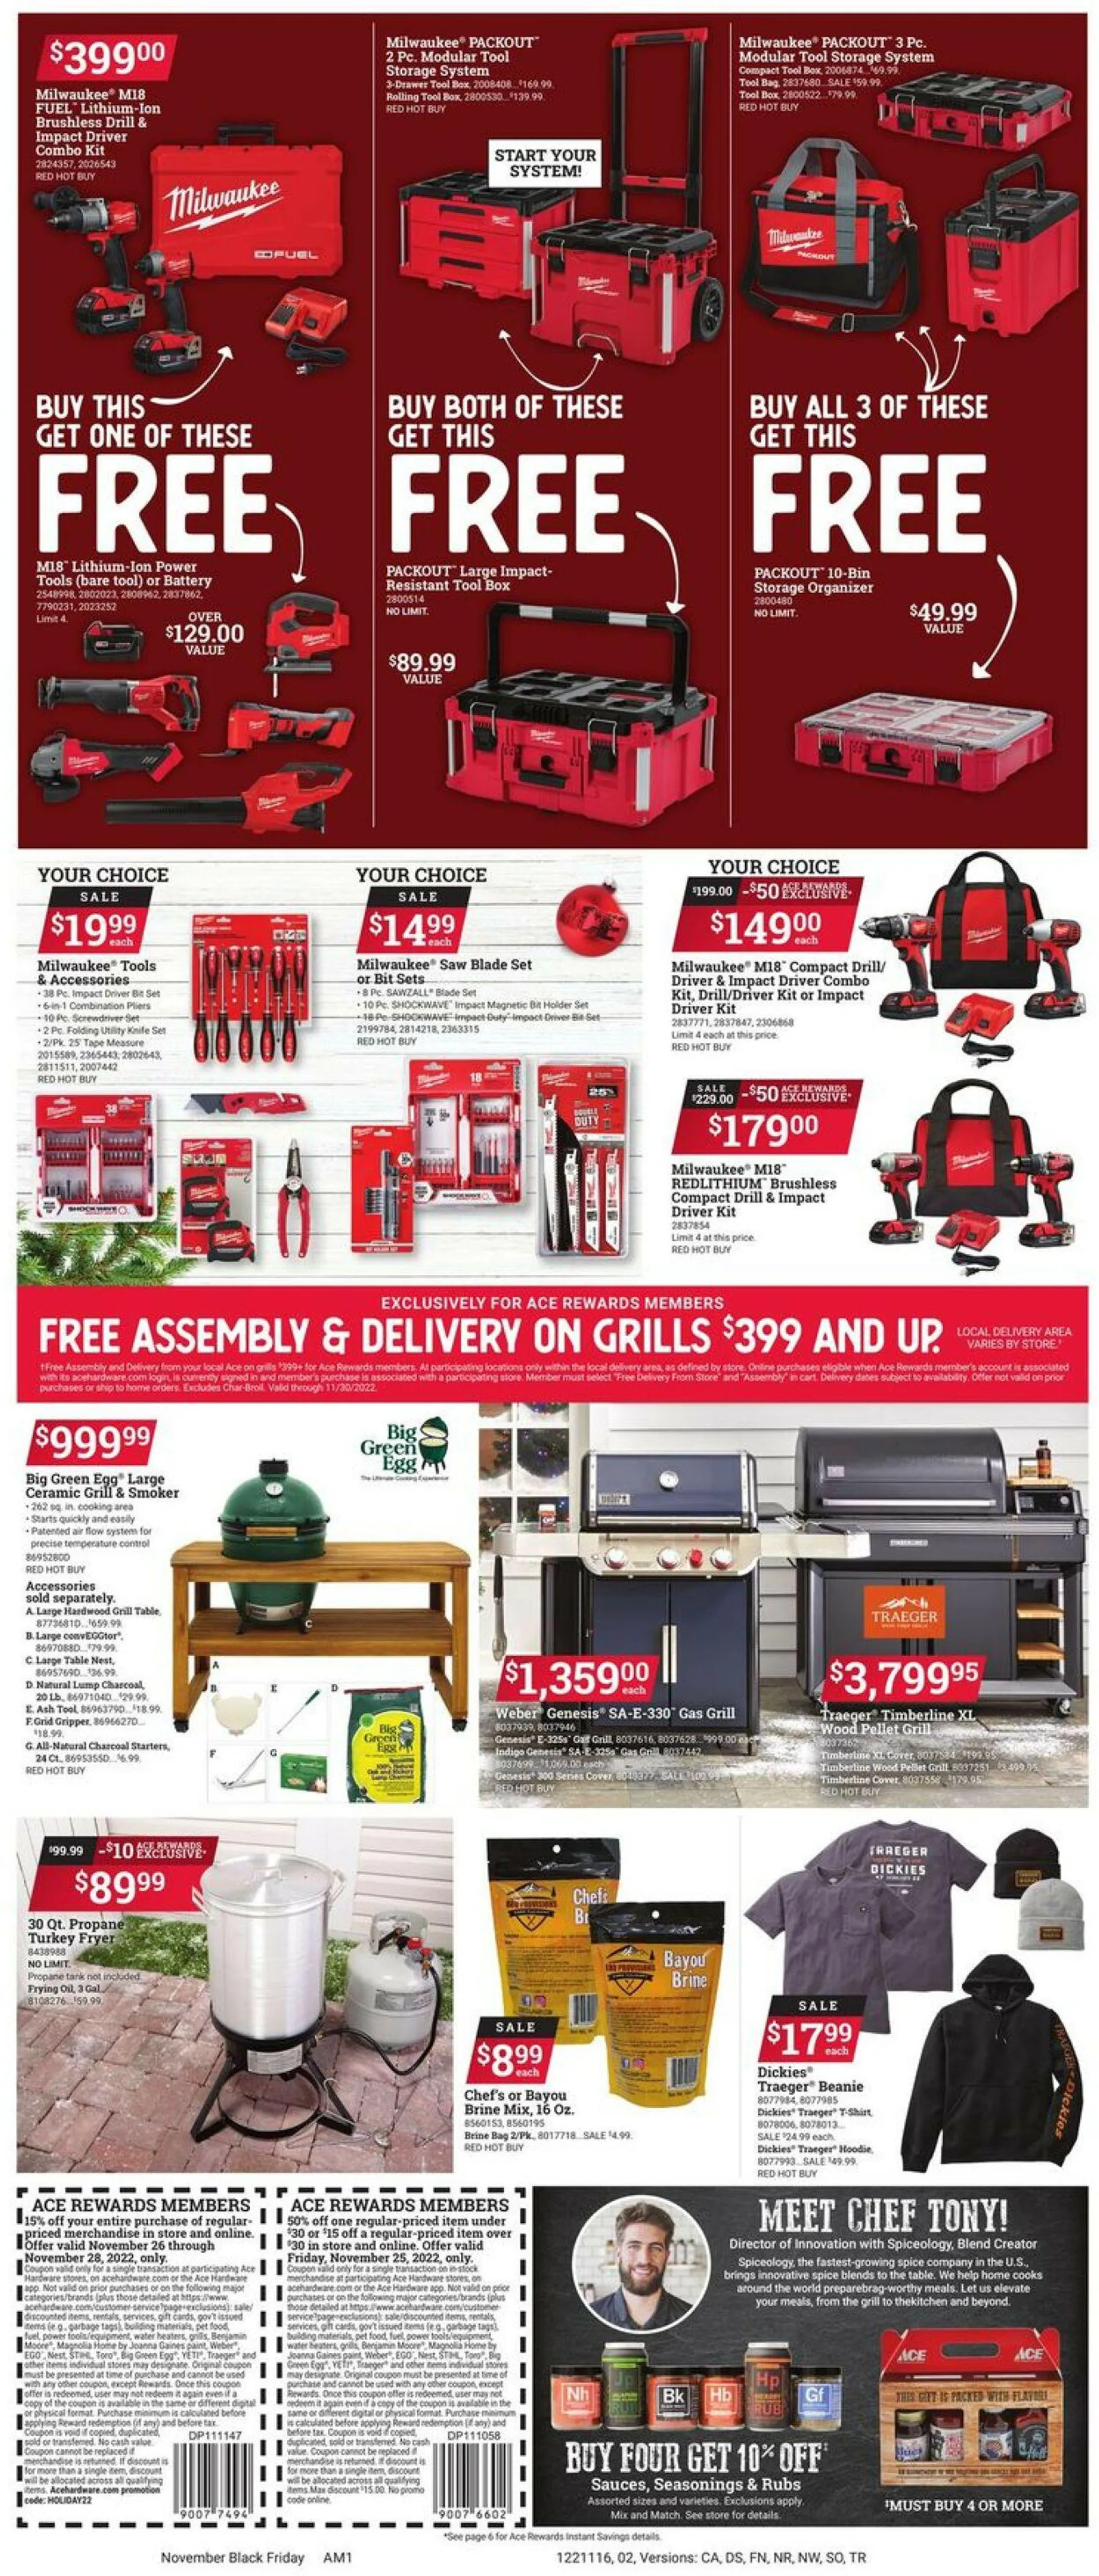 Ace Hardware Current weekly ad - 2